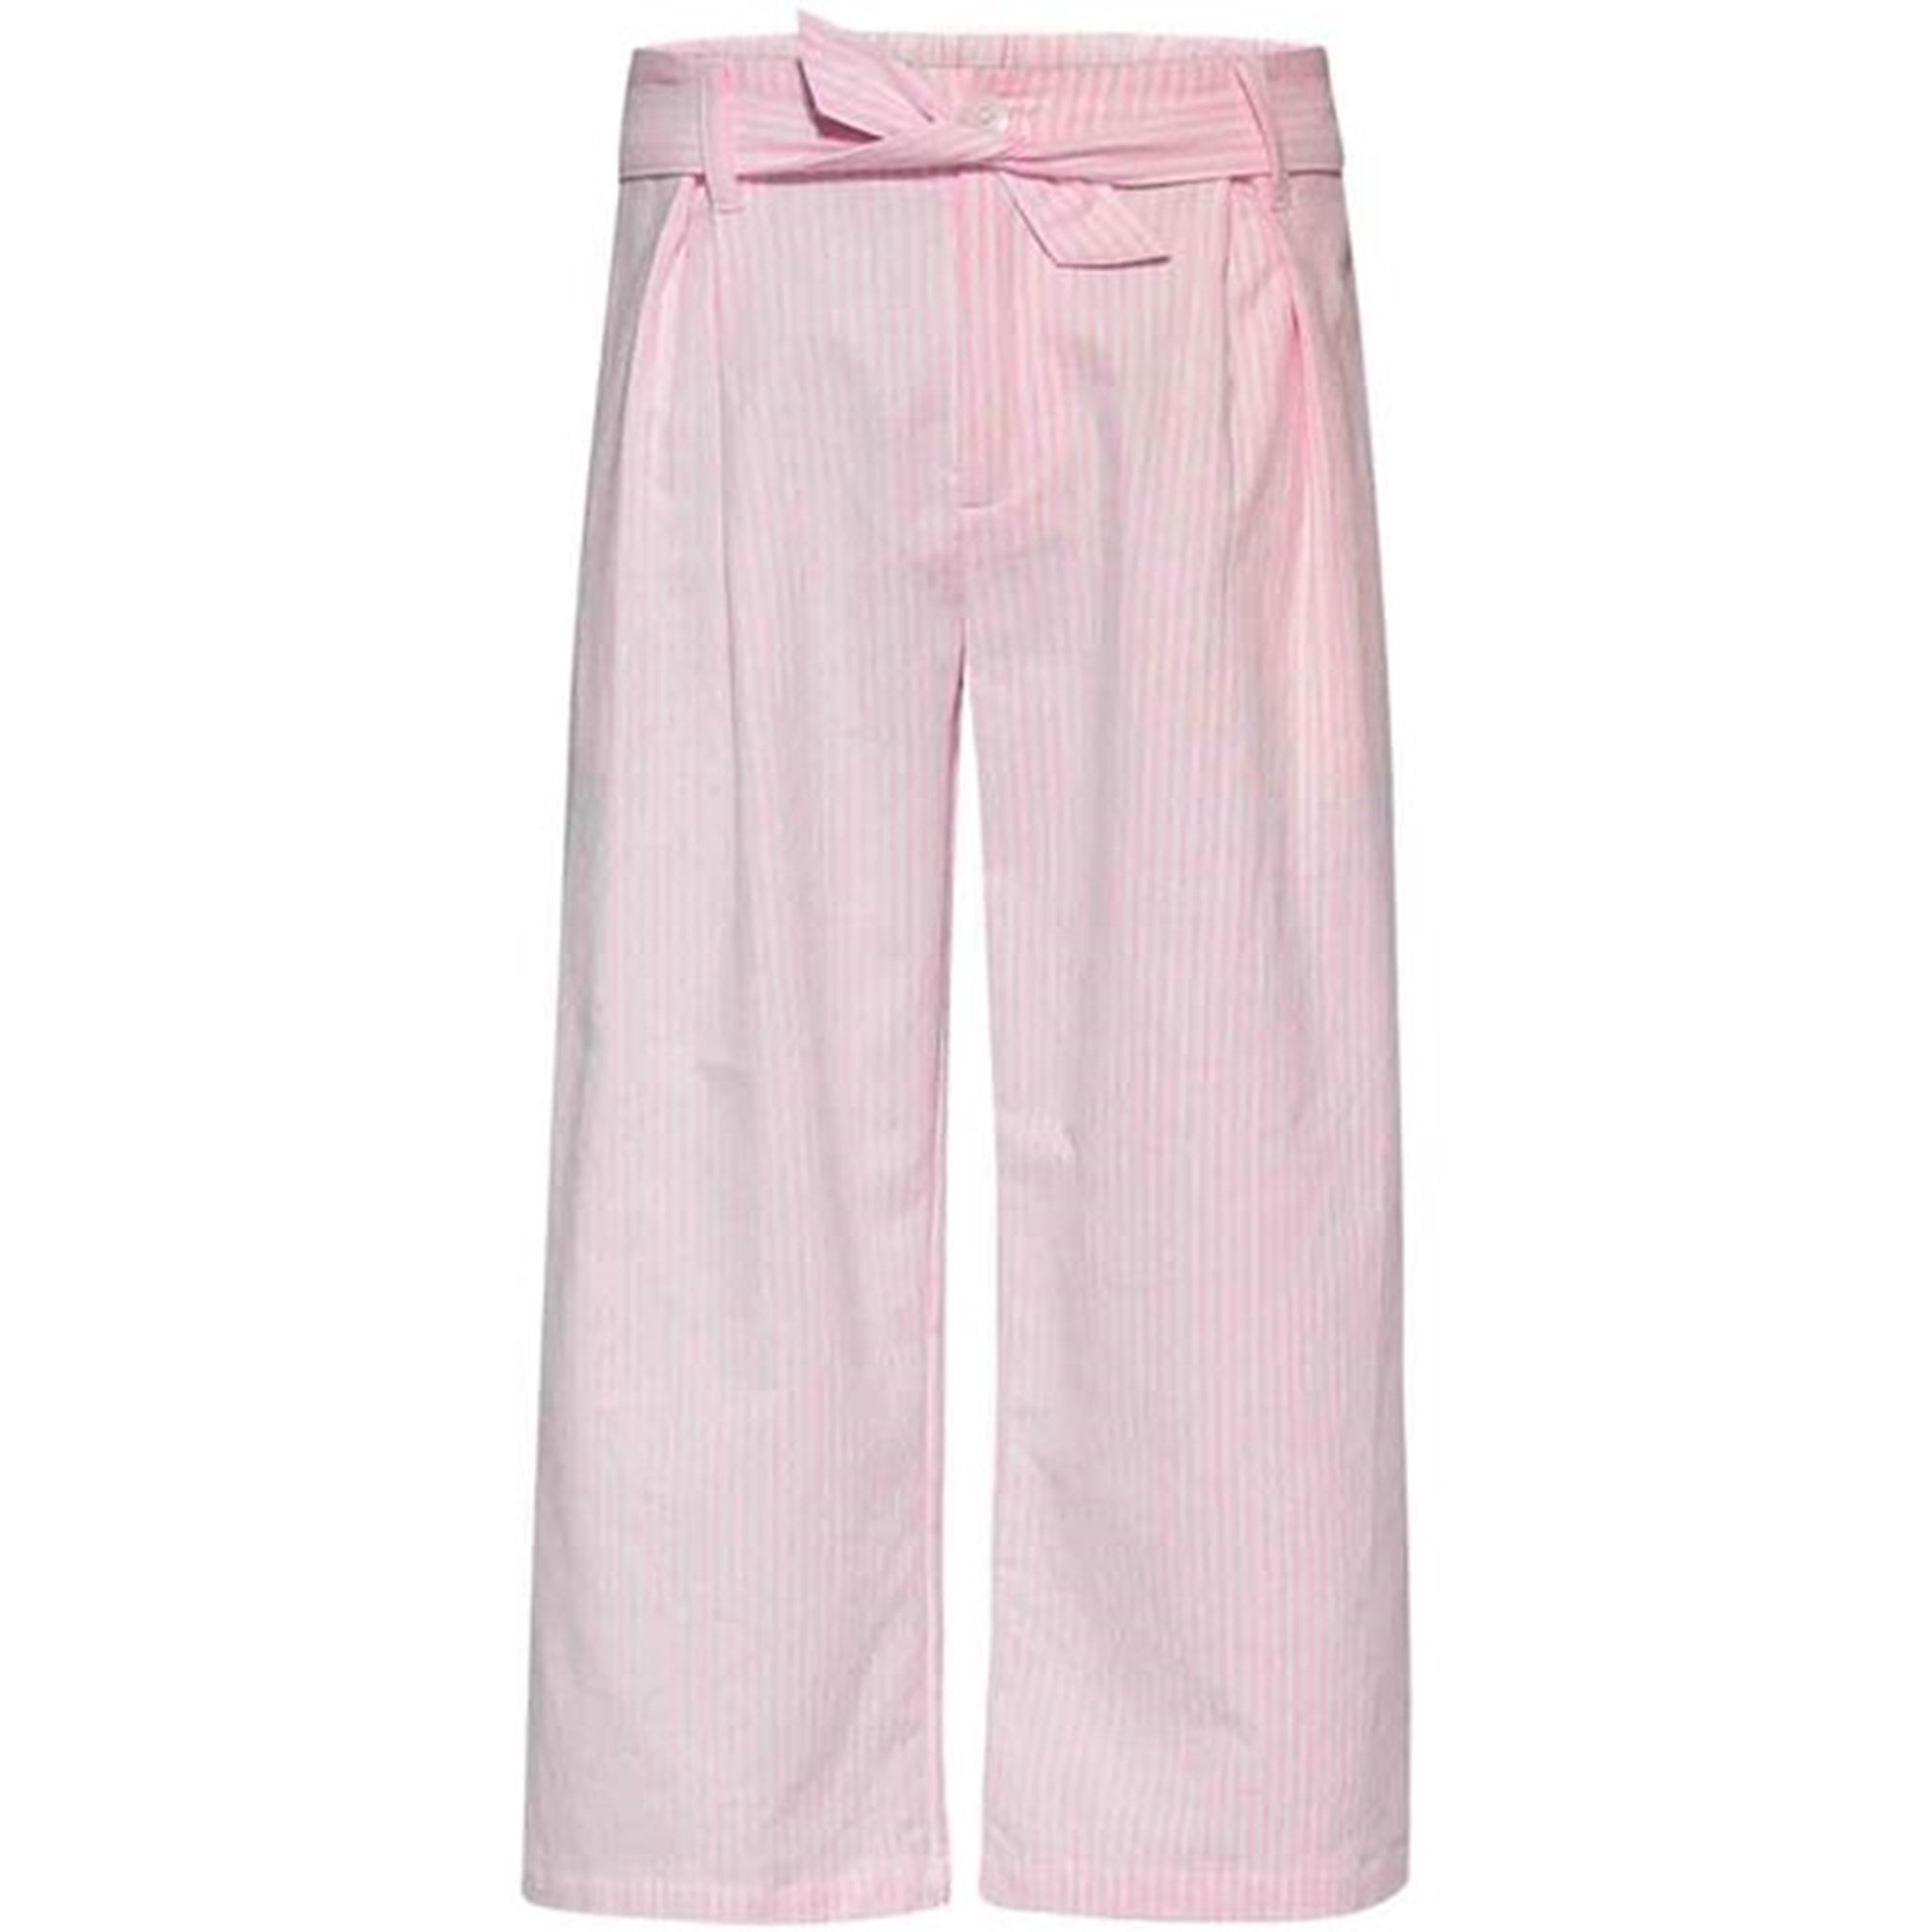 Tommy Hilfiger Neon Ithaca Stripe Pants Cotton Candy